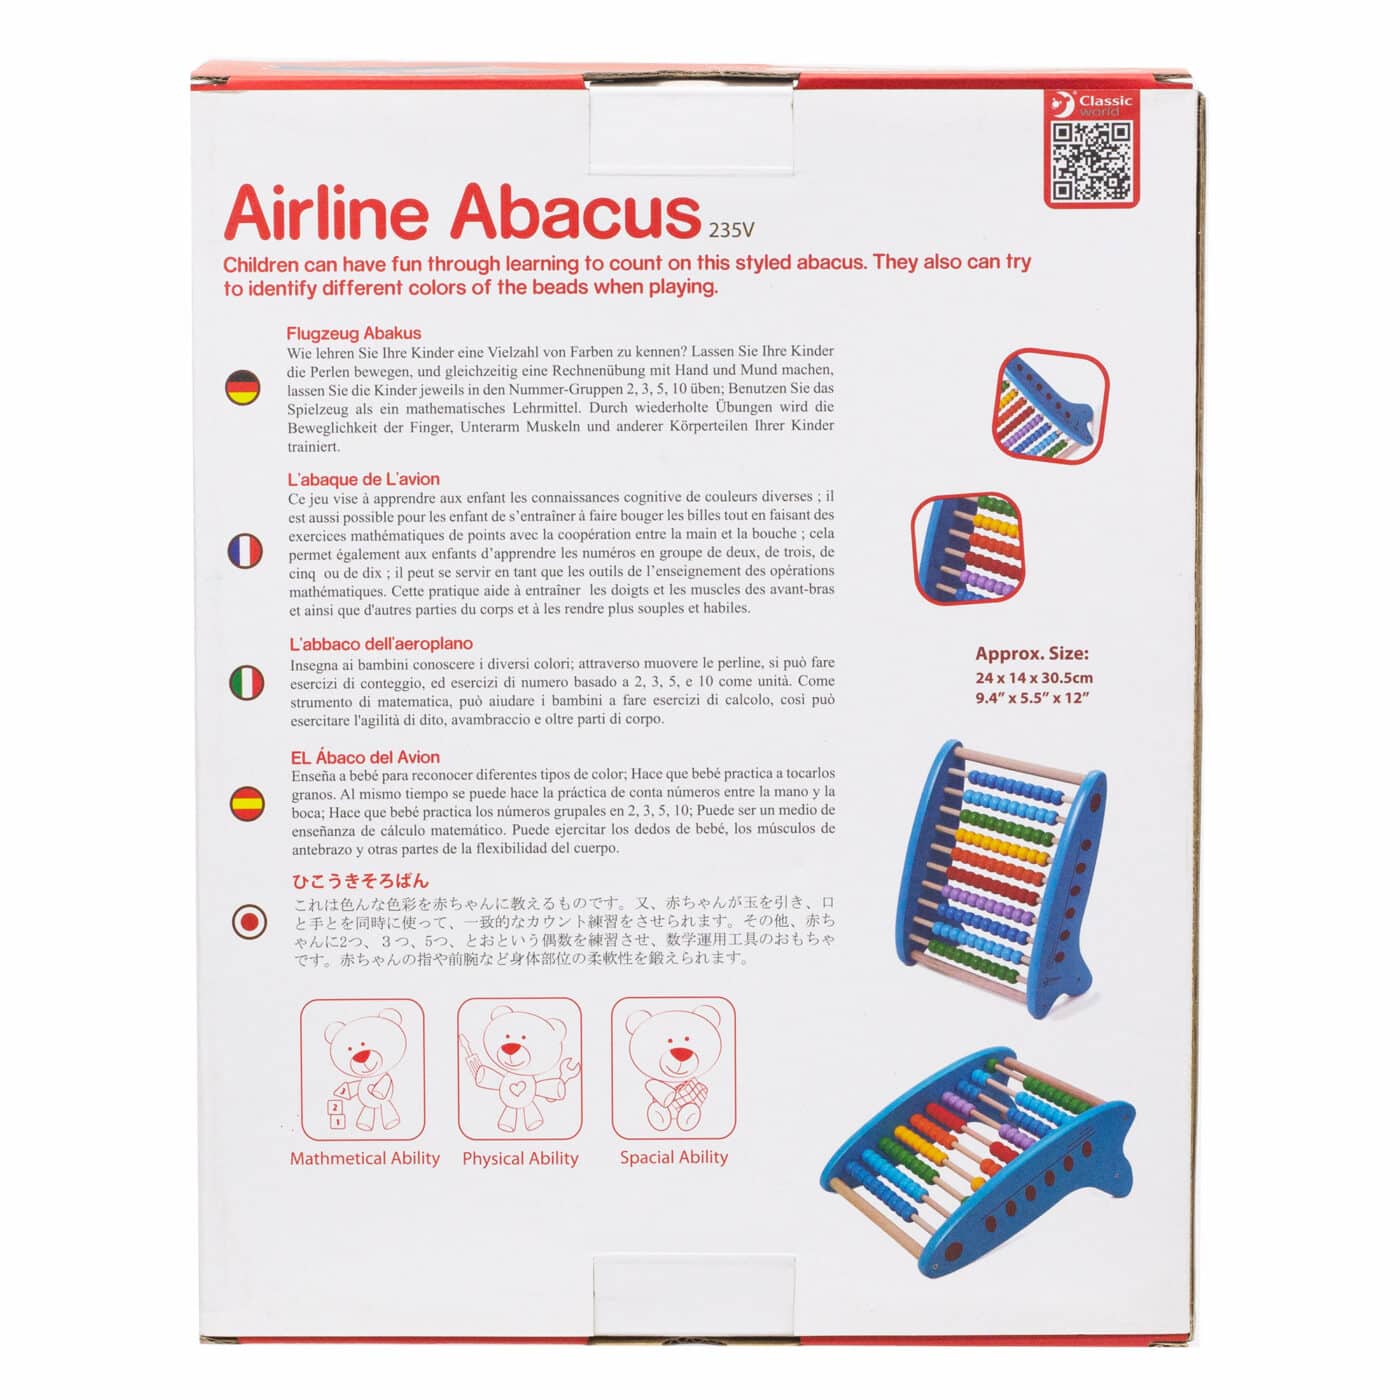 Classic - Wooden Airline Abacus